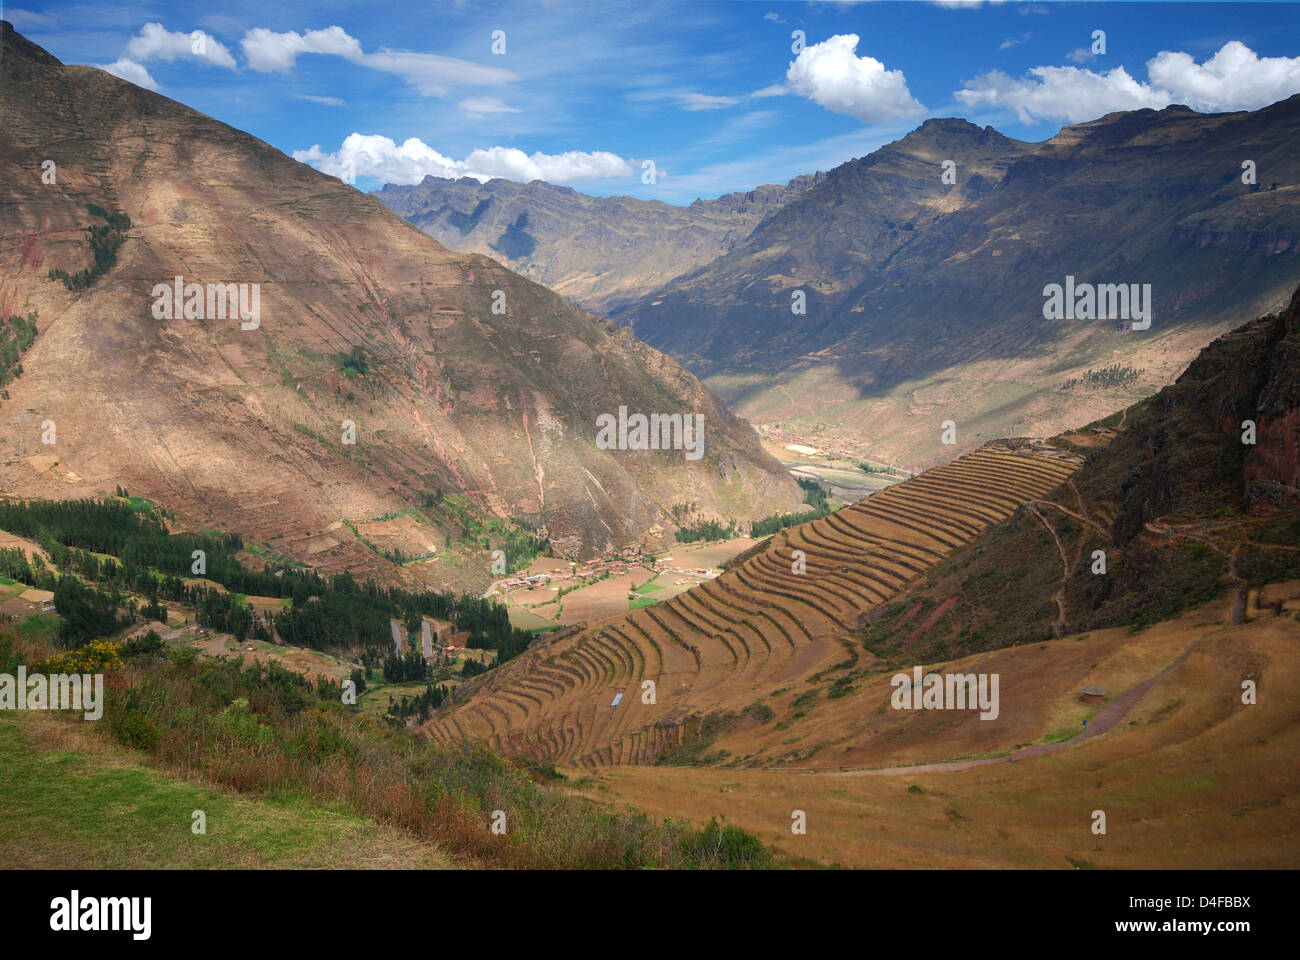 Agricultural terraces in the Andes mountains along the Sacred Valley, Peru Stock Photo